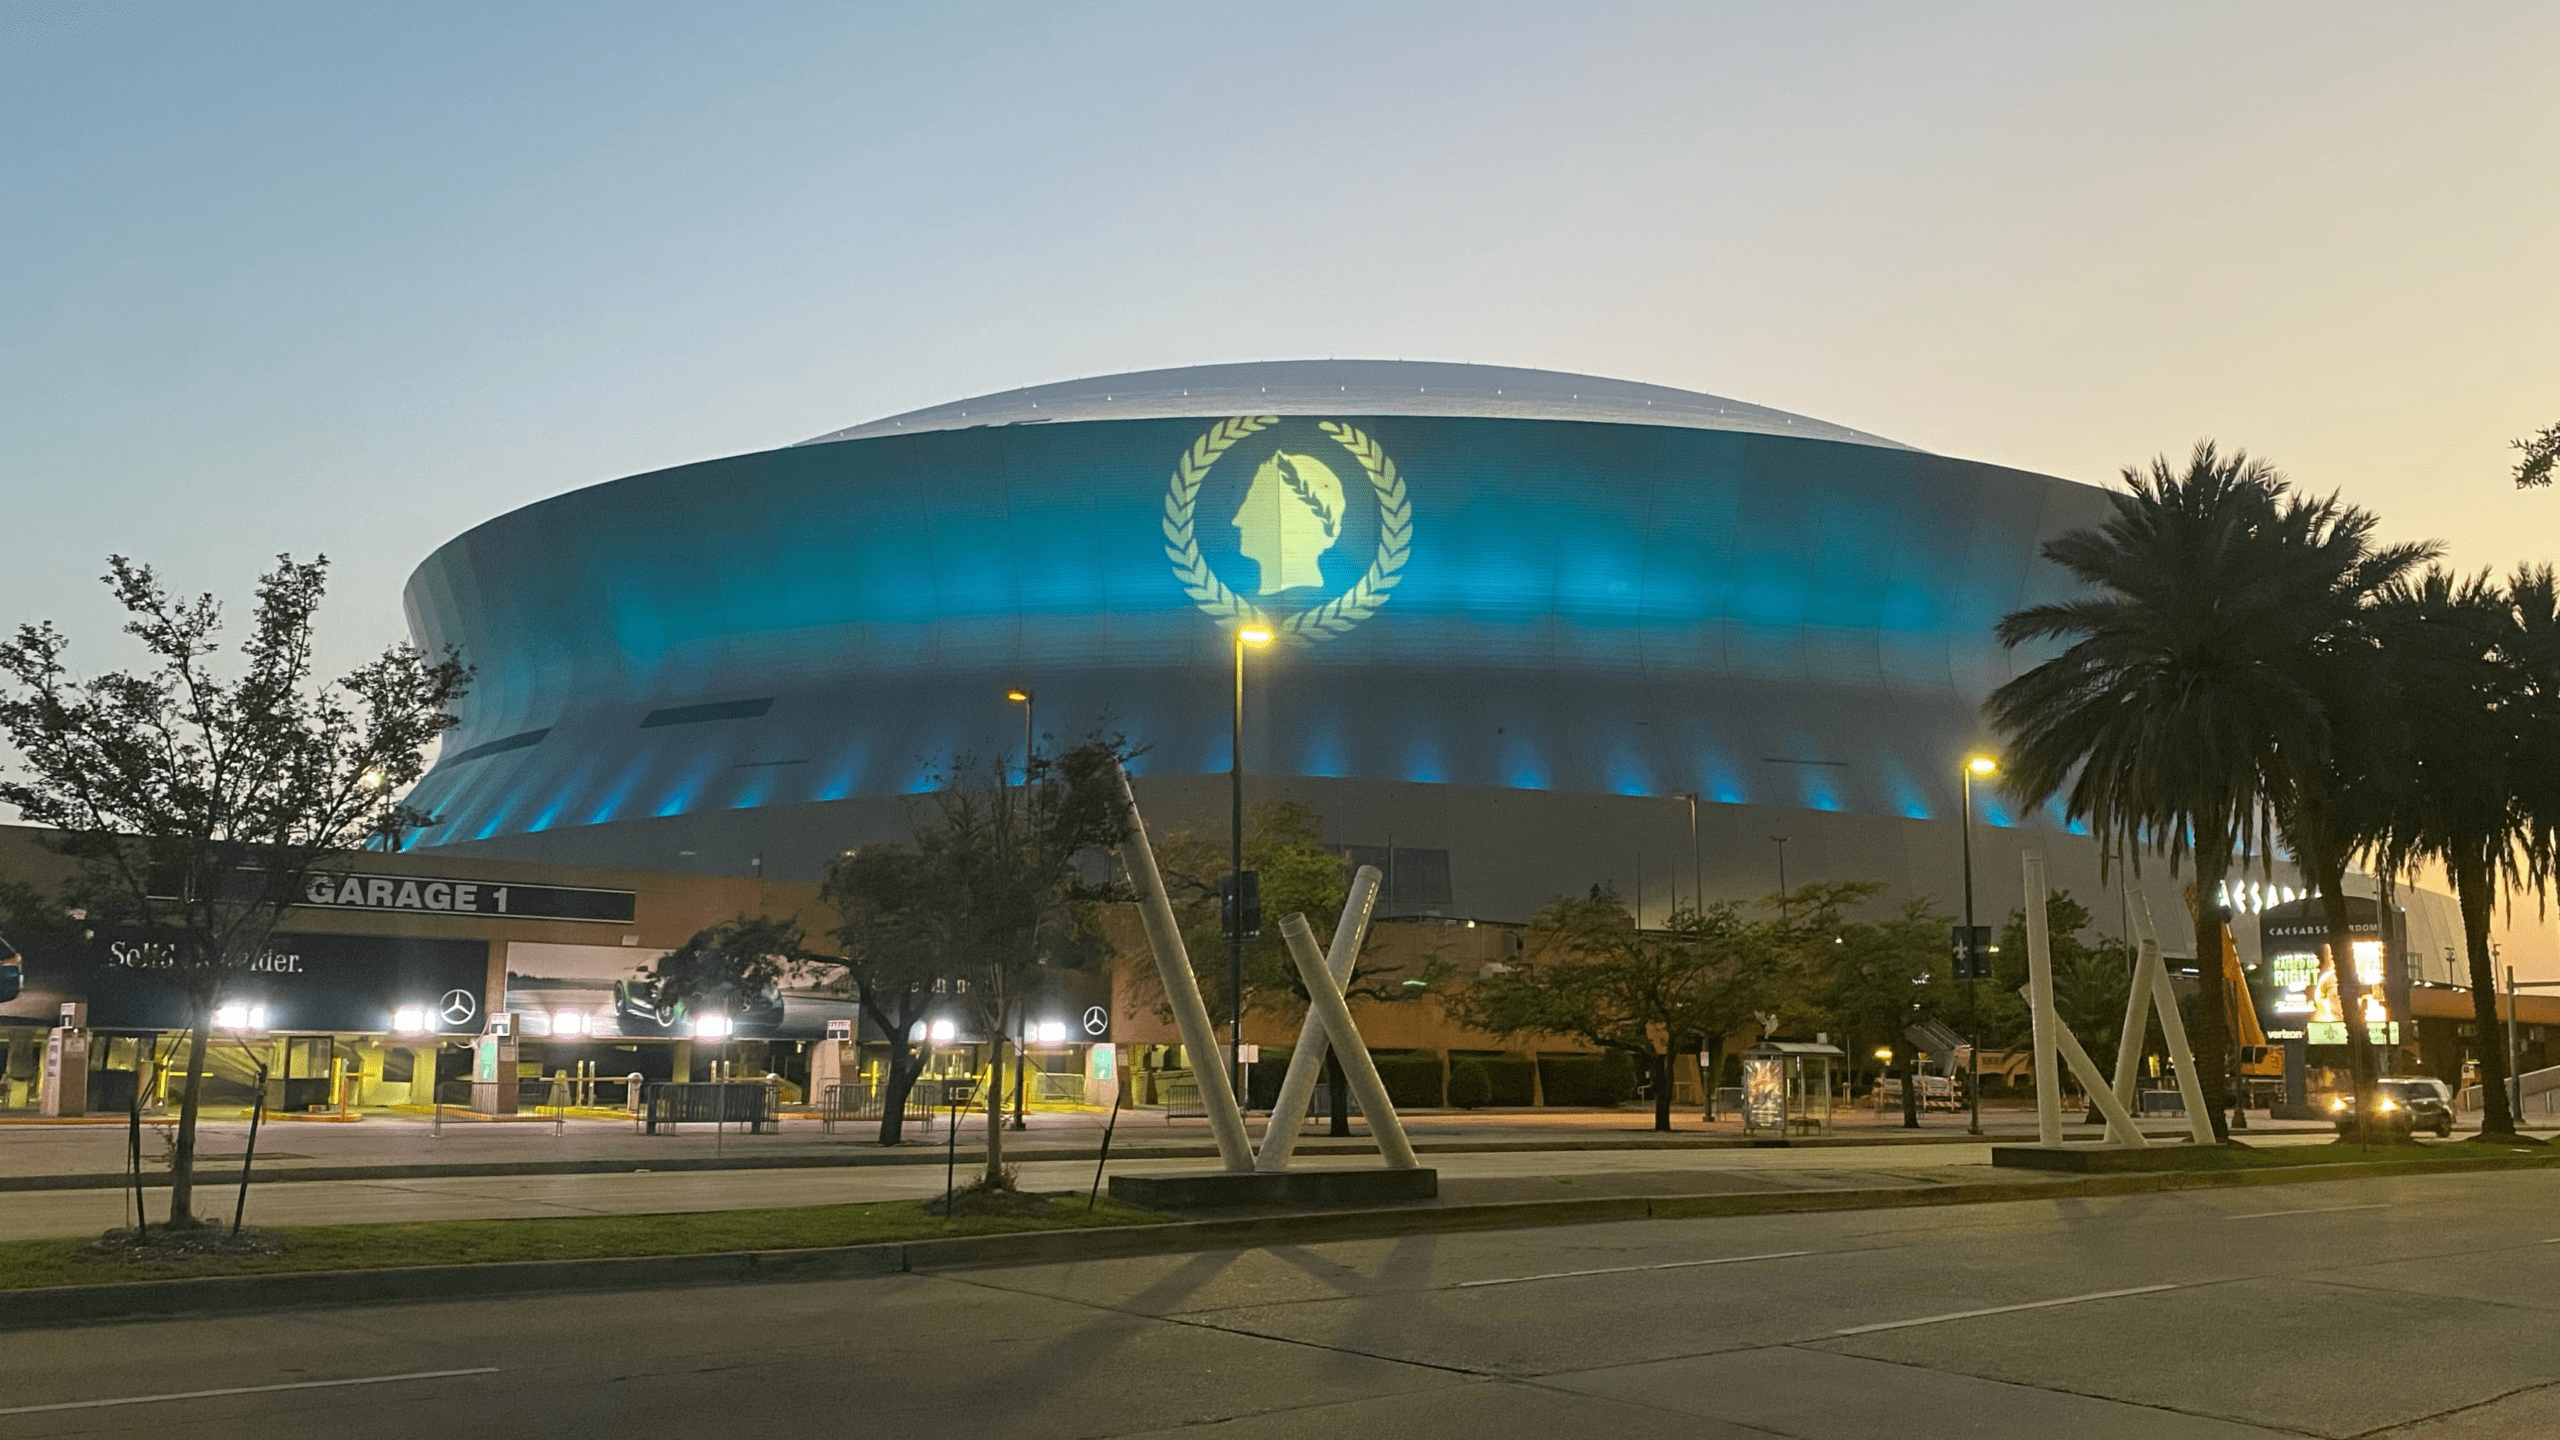 The New Orleans Superdome turned teal for Food Allergy Awareness Week!